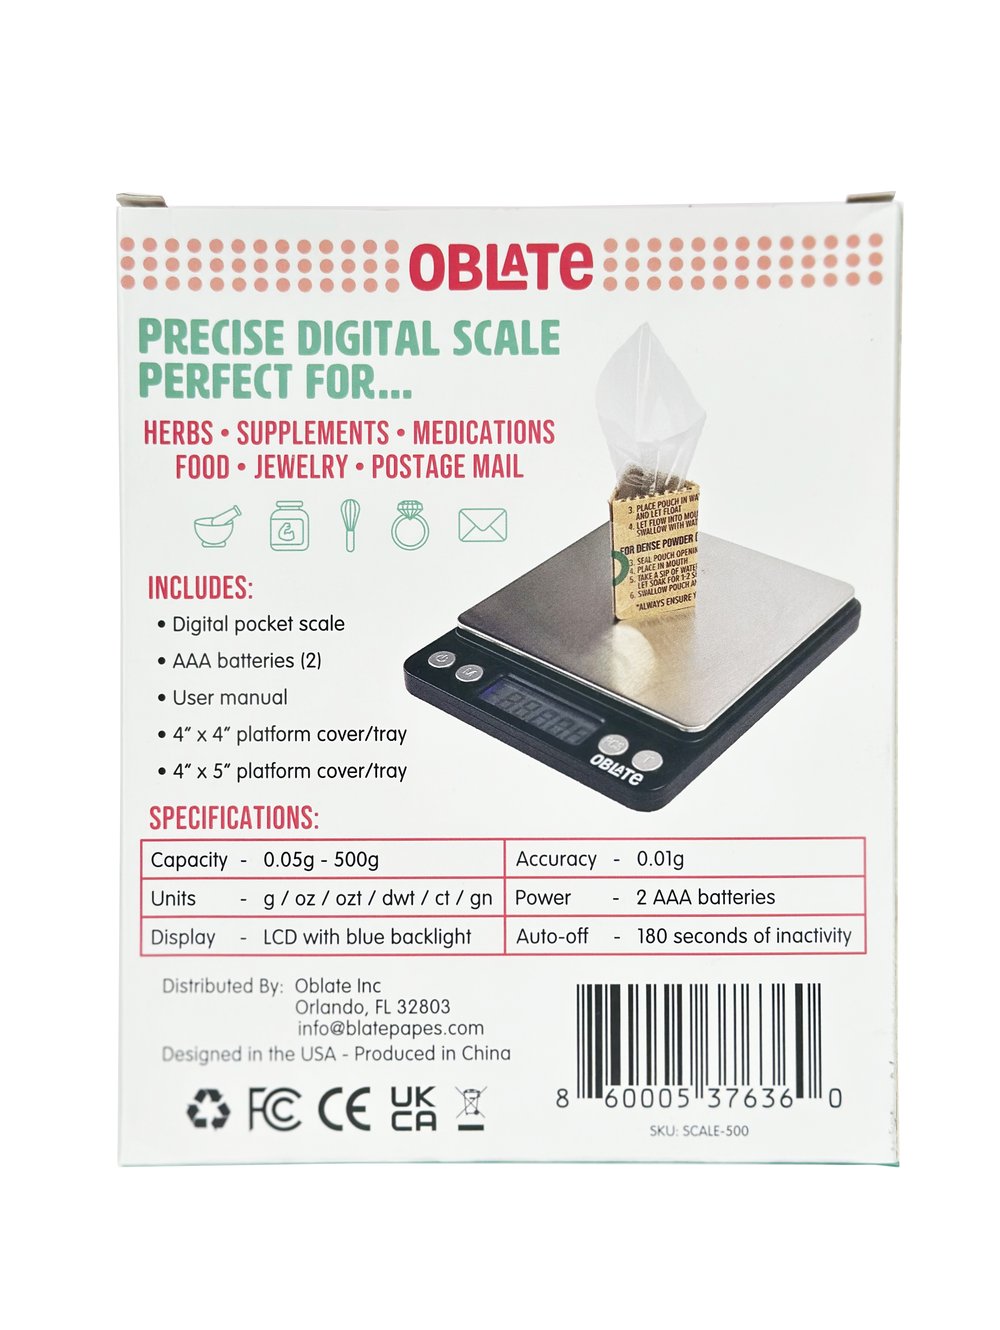 500g x 0.01g Digital Precision Scale ACCT-500 Counting Scale with Trays